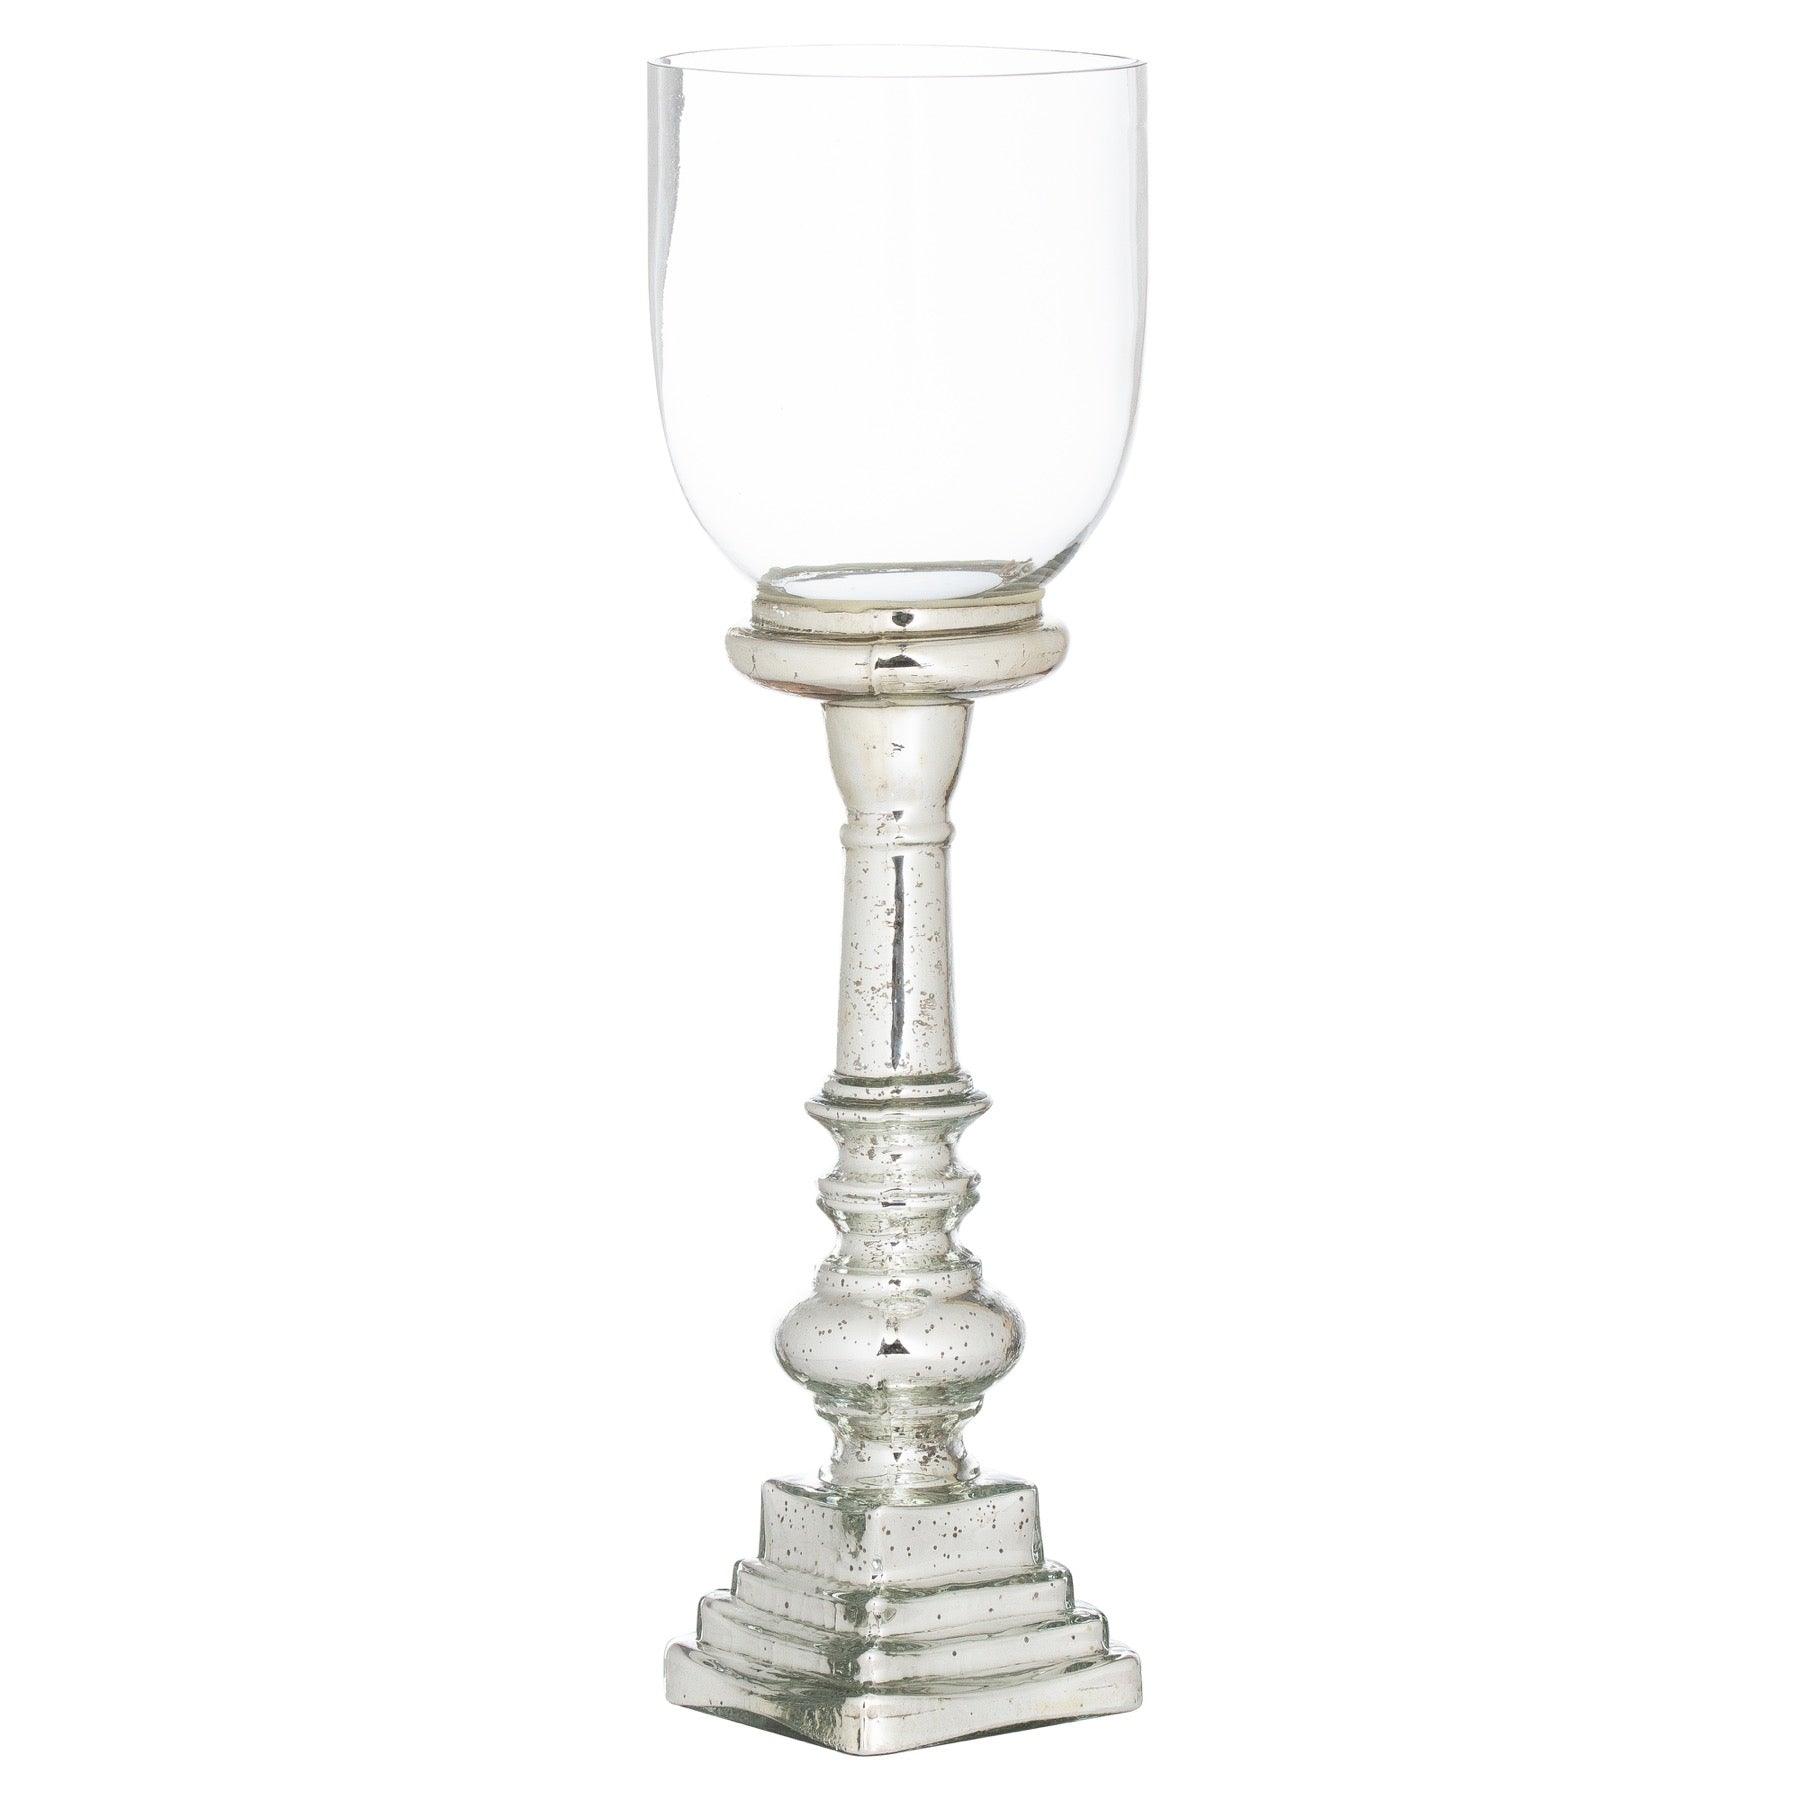 Mercury Effect Glass Top Tall Candle Pillar Holder - £49.95 - Gifts & Accessories > Candle Holders > Silver 